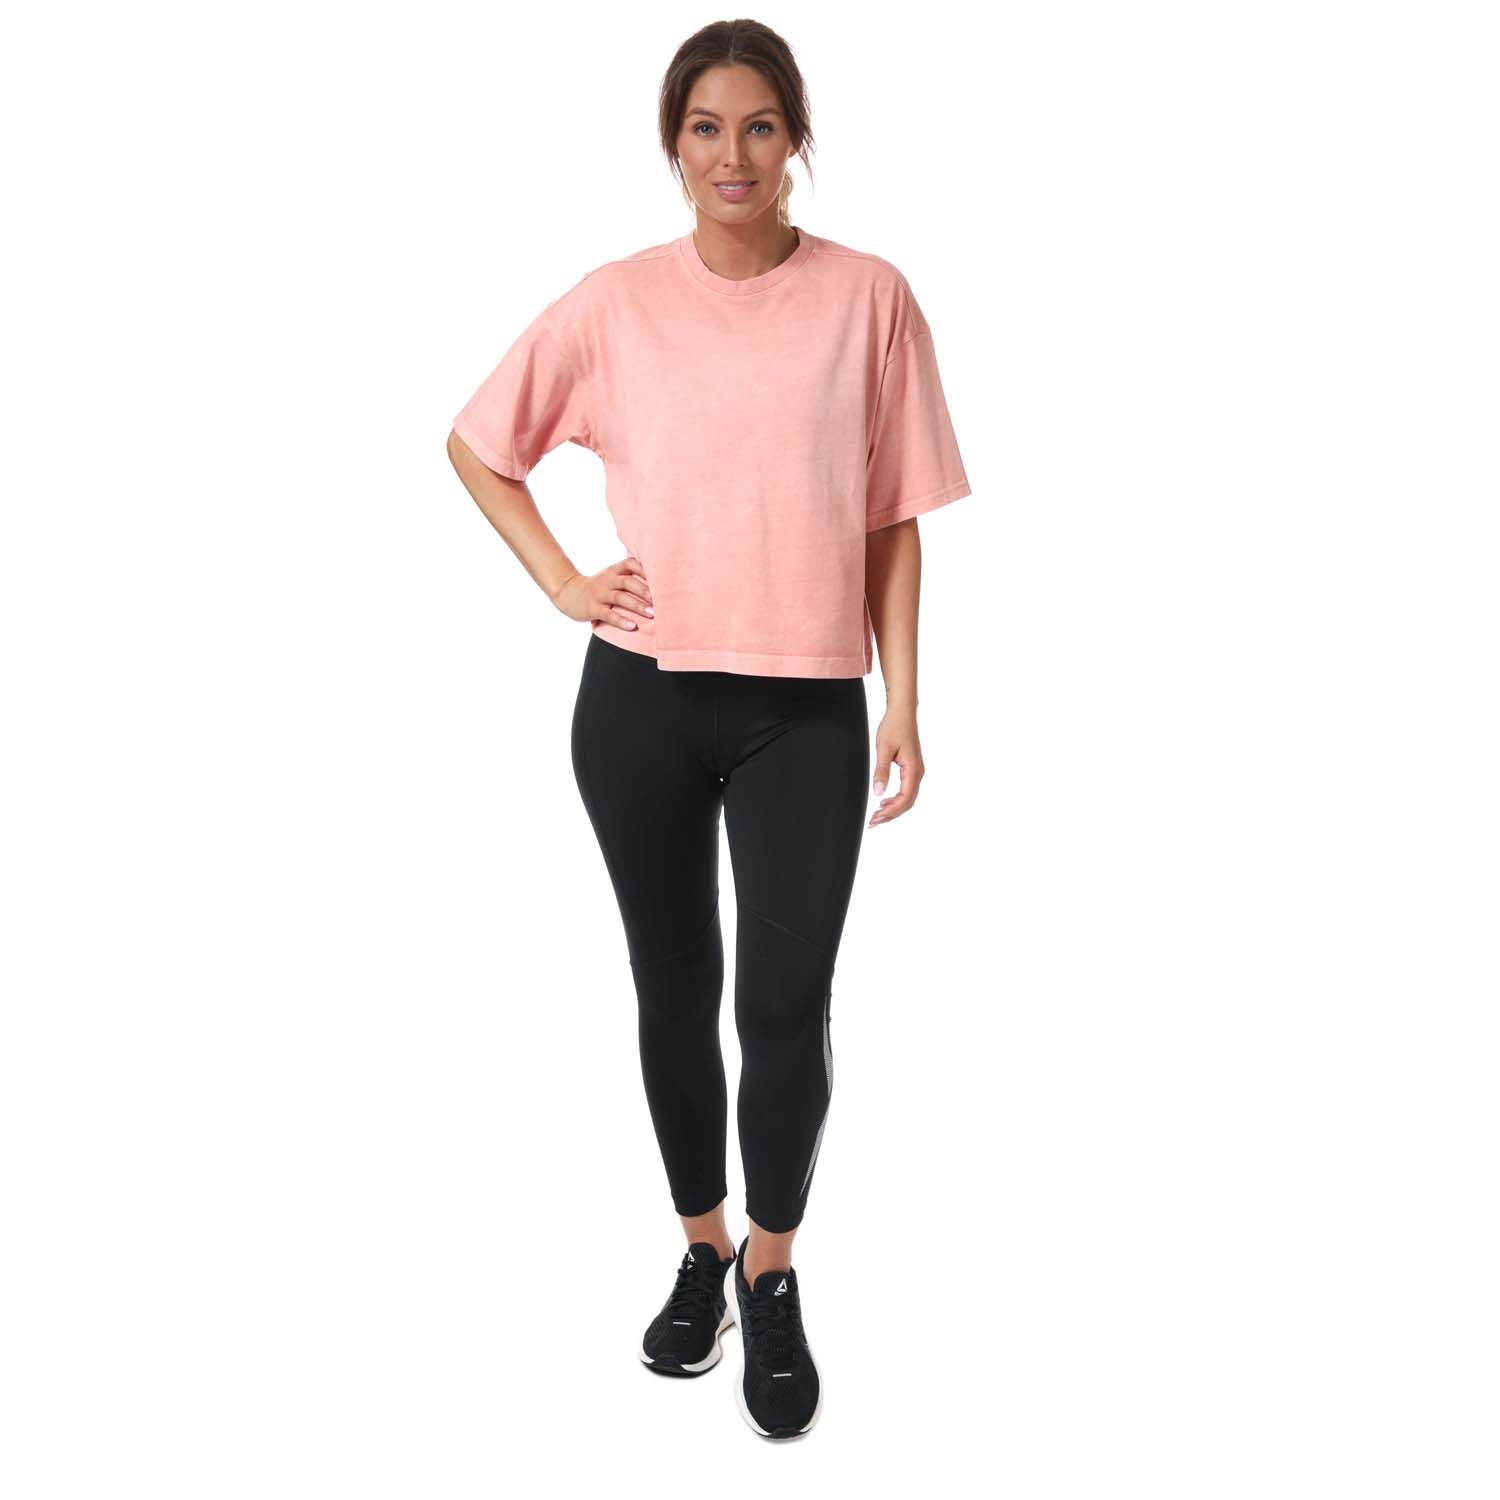 Womens Reebok Classics Natural Dye Cropped T-Shirt in berry.- Crew neck.- Short sleeves.- Drop shoulder.- Heavyweight feel.- Tonal embroidered logo.- Relaxed fit.- Main material: 100% Organic Cotton. Rib Part: 95% Organic Cotton  5% Elastane.- Ref:H09019